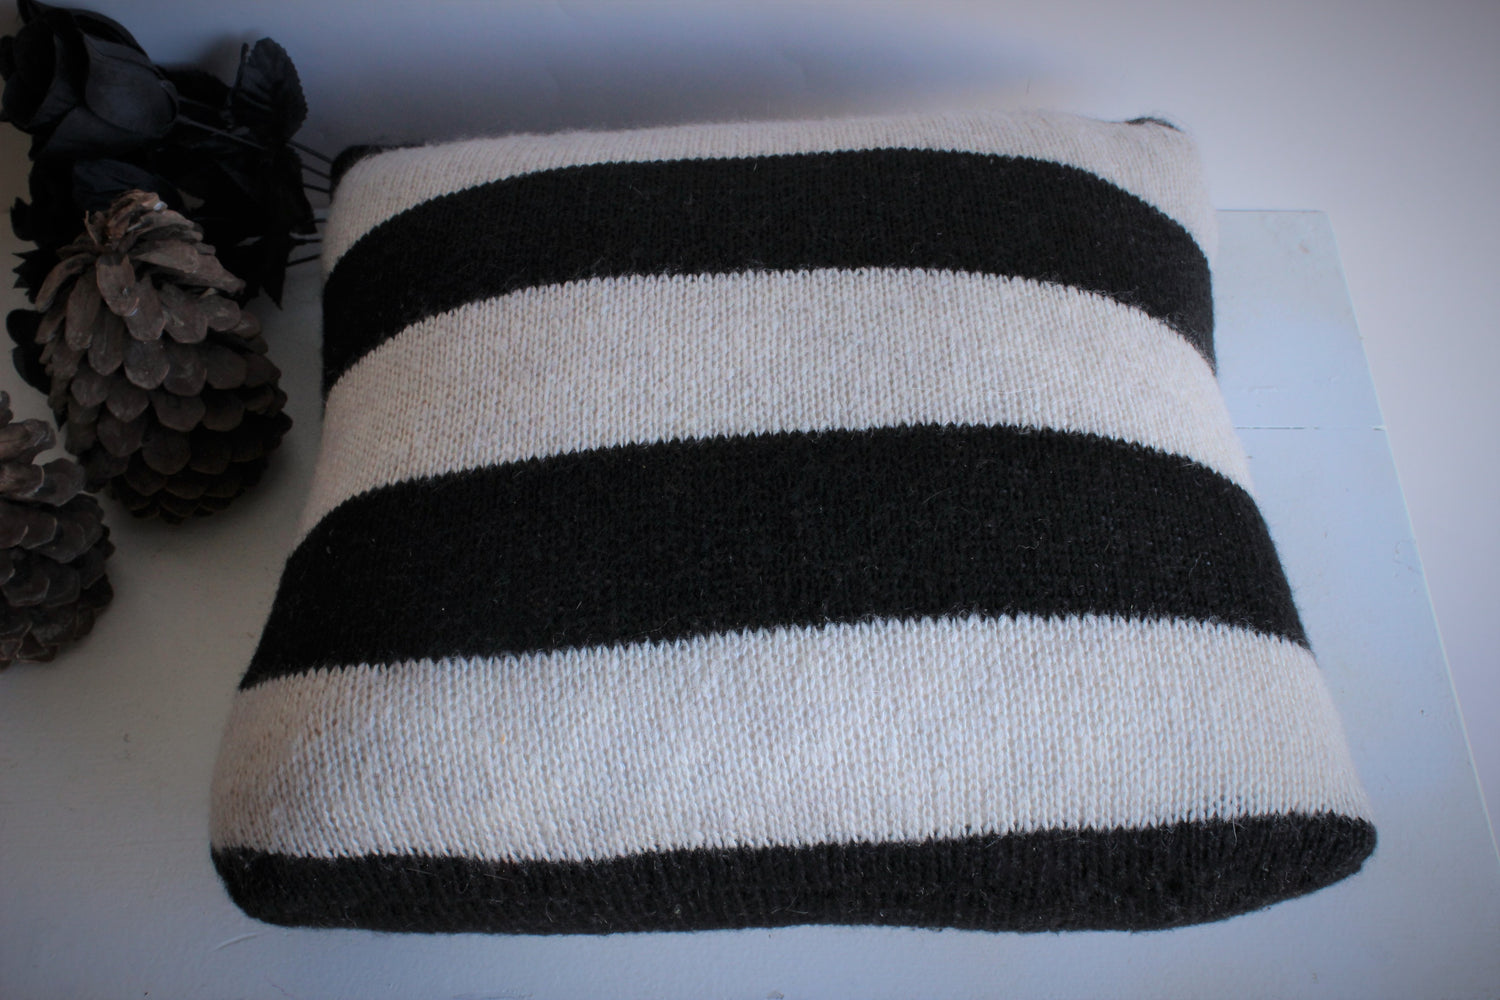 The "Jack" Sweater Pillow, Down Filled.